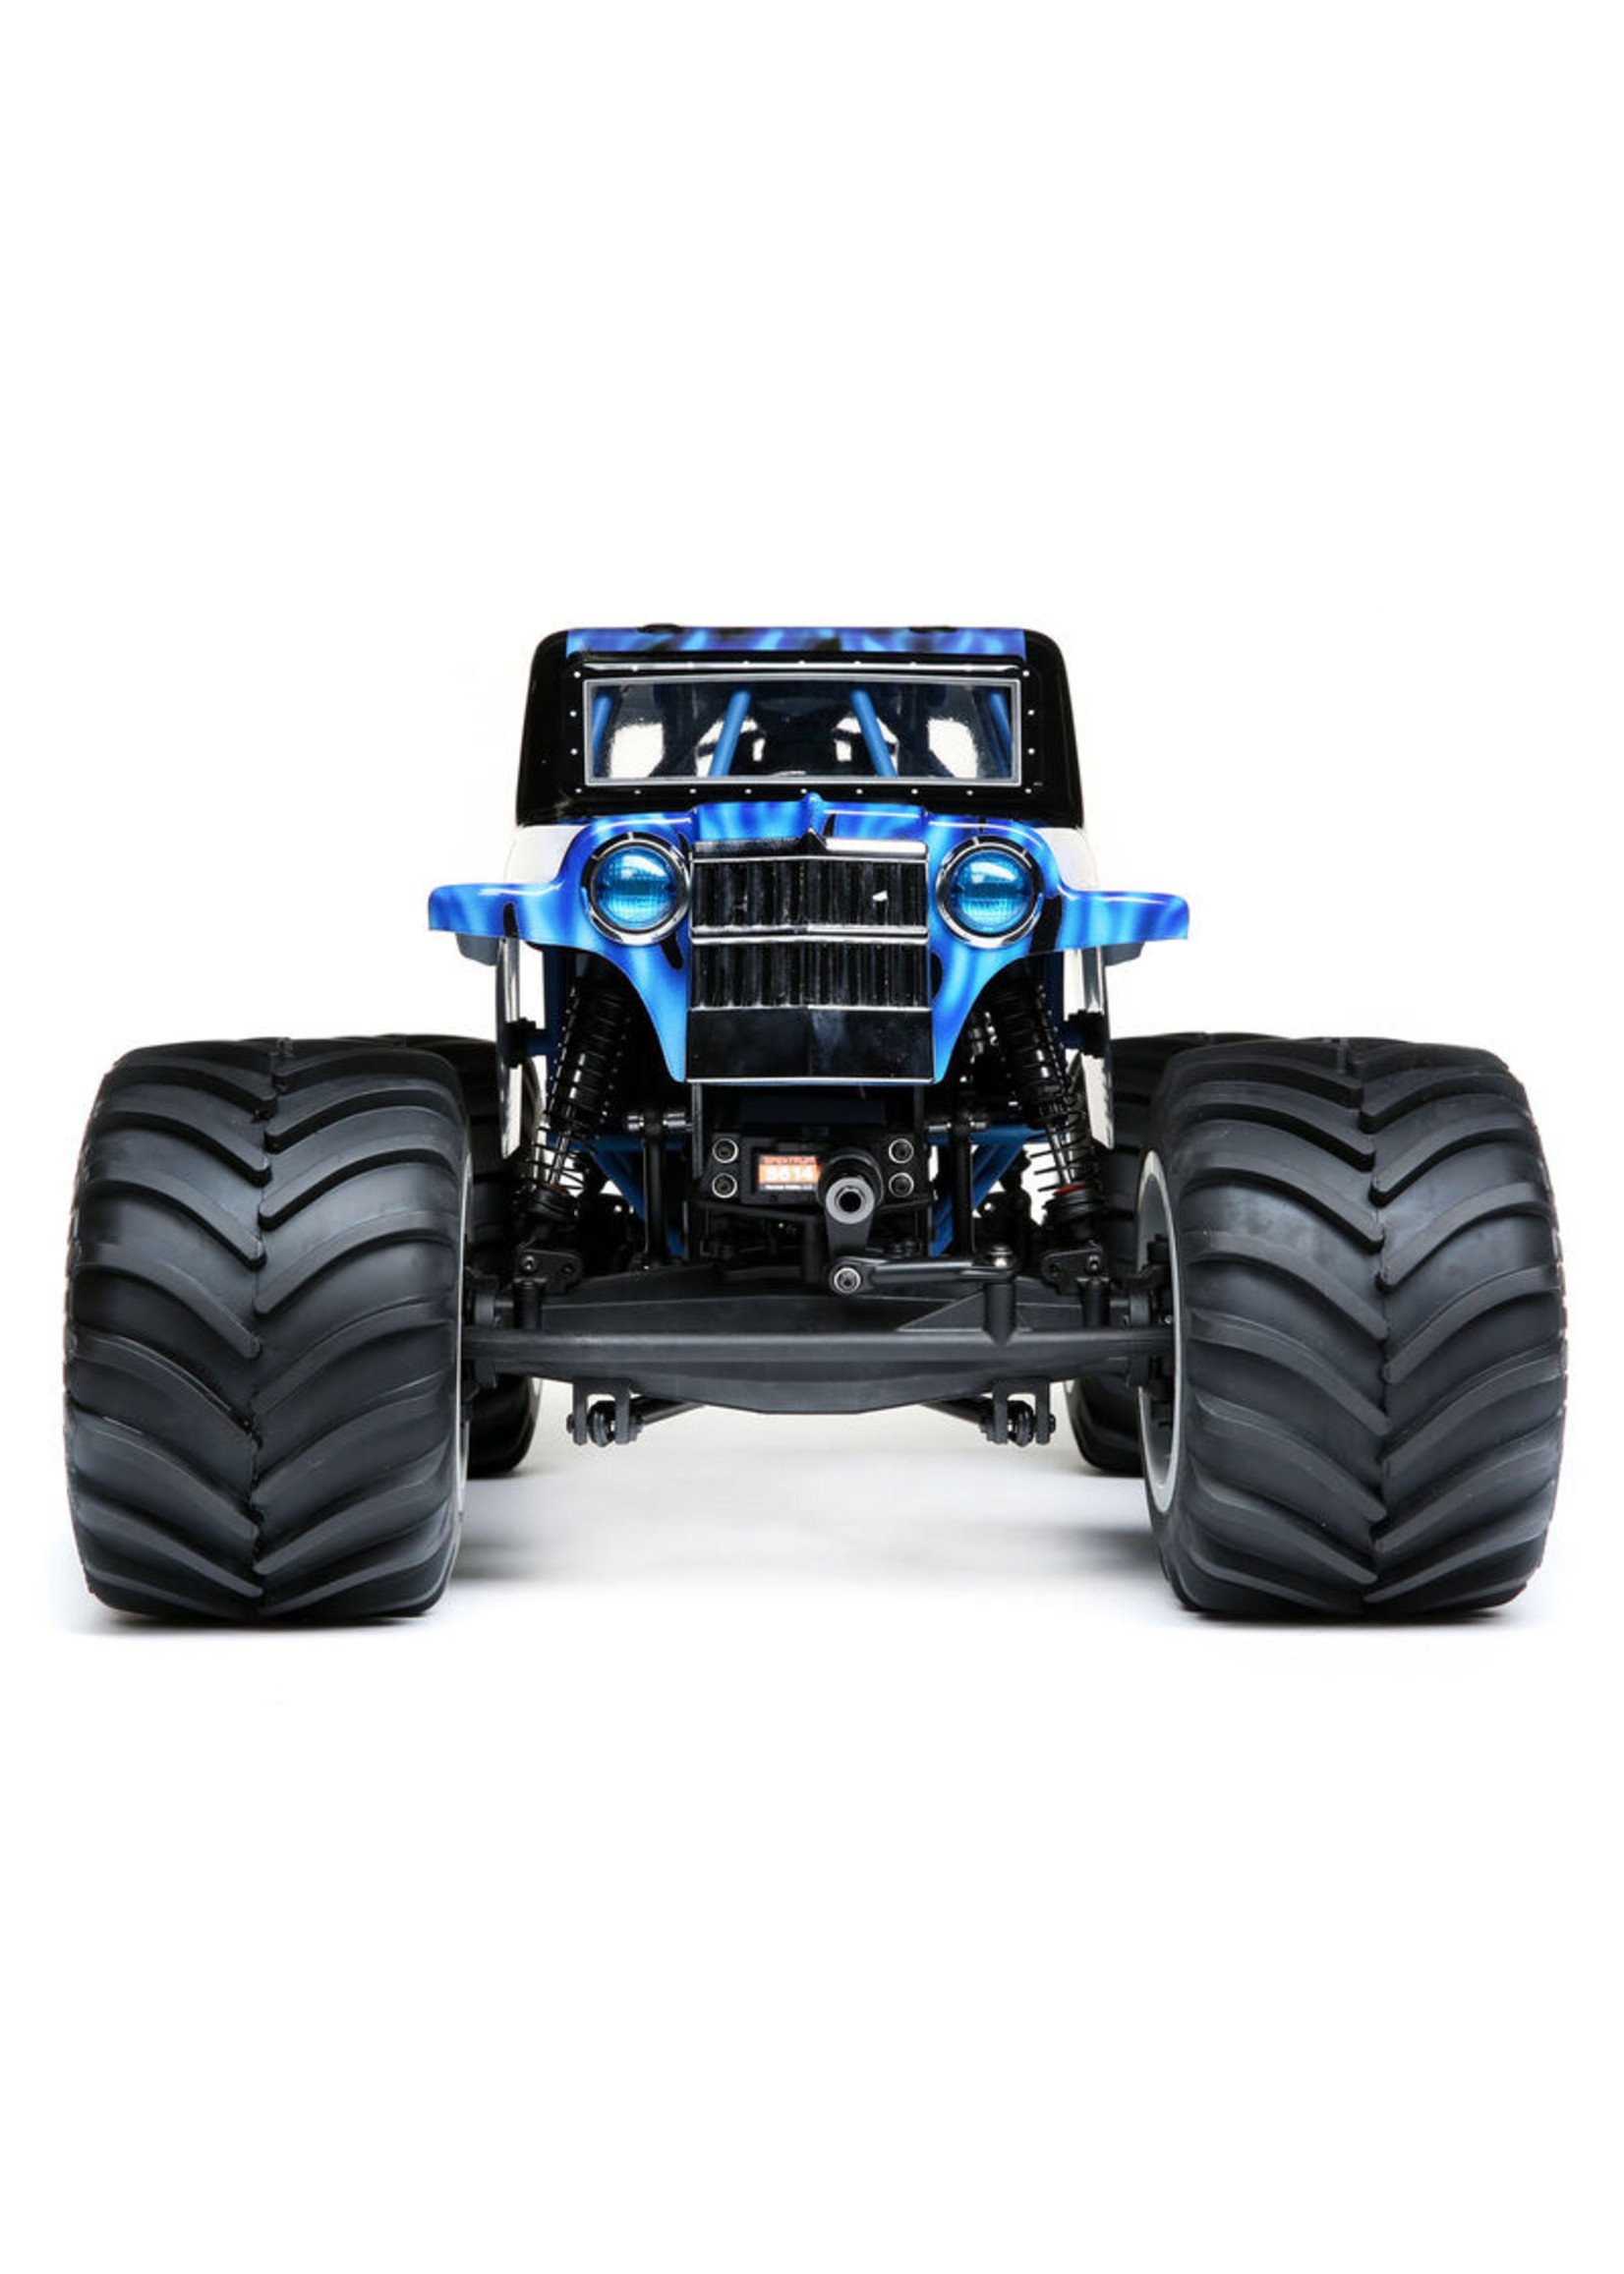 Losi LMT 4WD Solid Axle Monster Truck RTR - Son-uva Digger